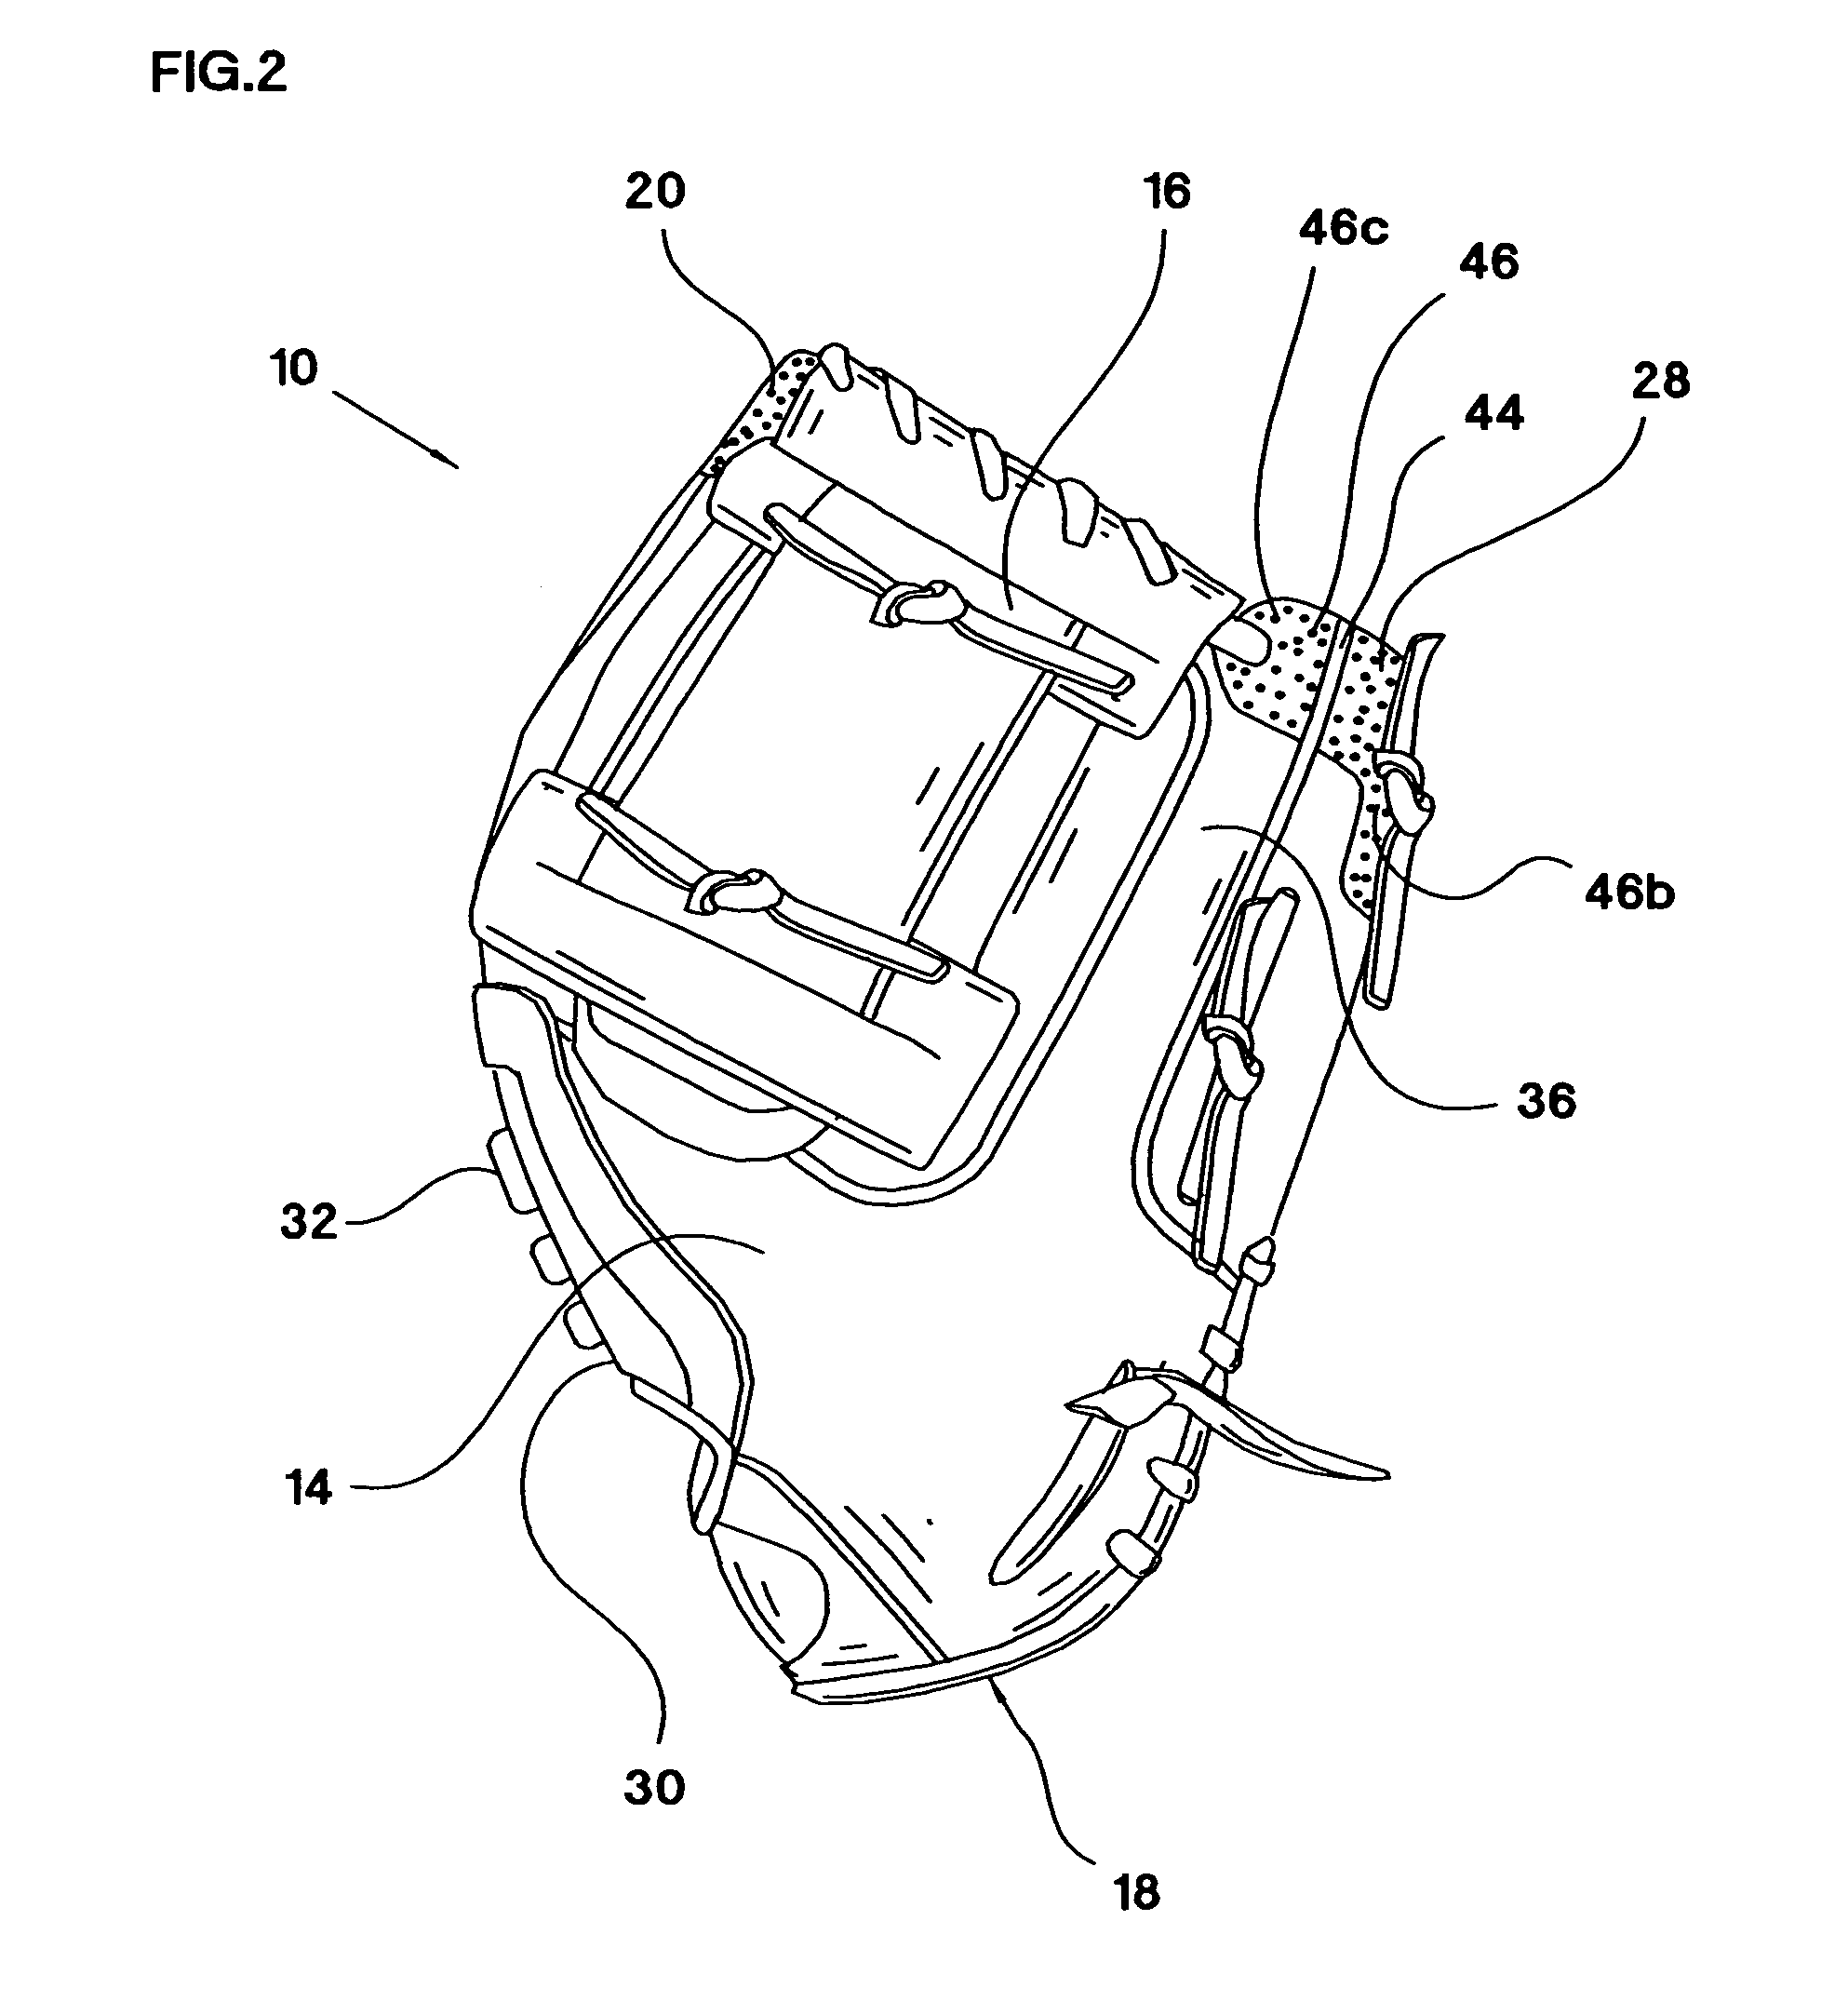 Ball glove formed with abrasion resistant material